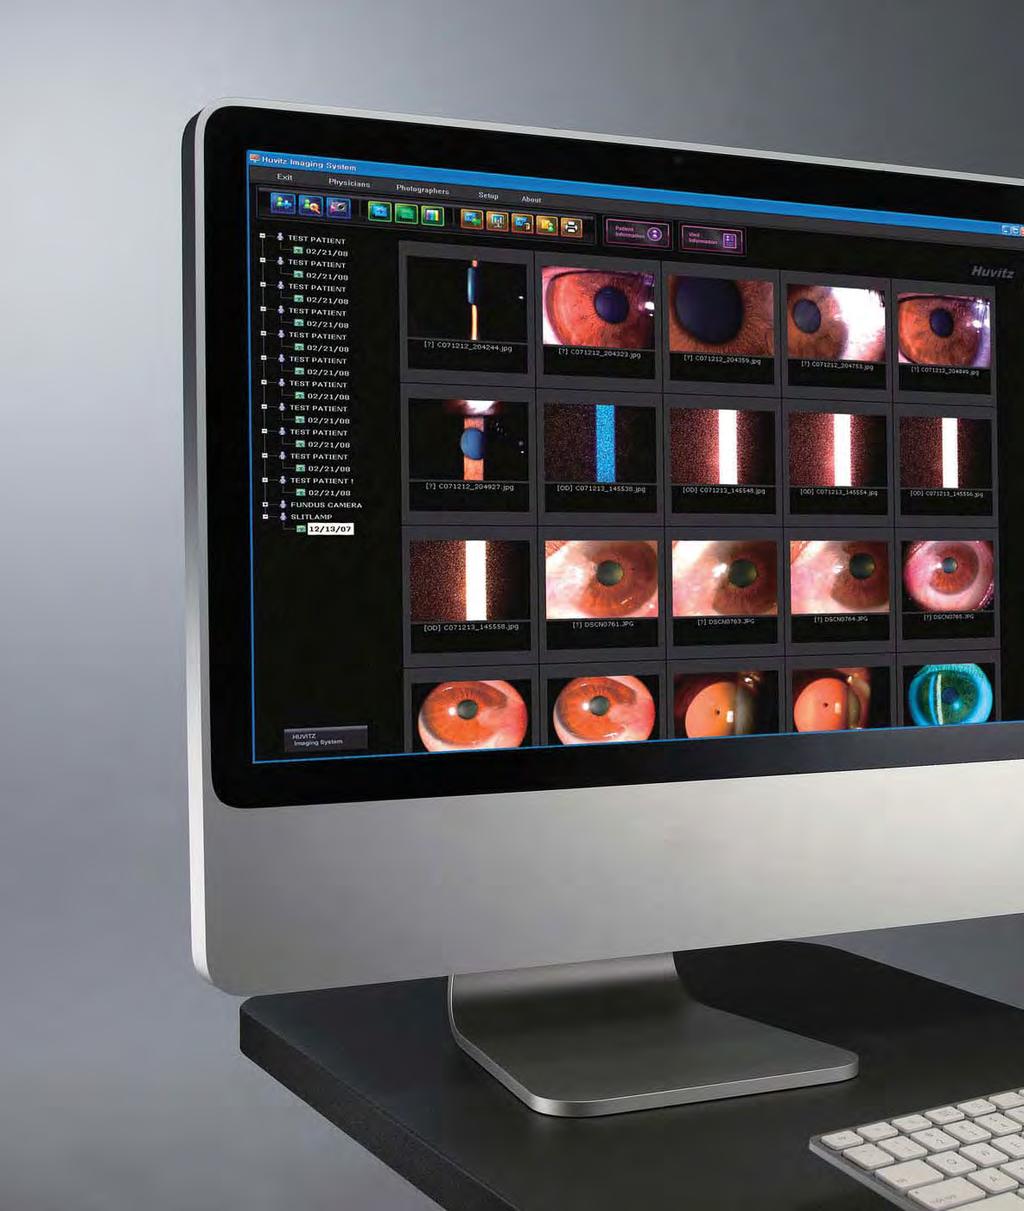 HUVITZ IMAGING SYSTEM HIS-5000 From diagnosis and patient data management to presentation and image processing: the complete